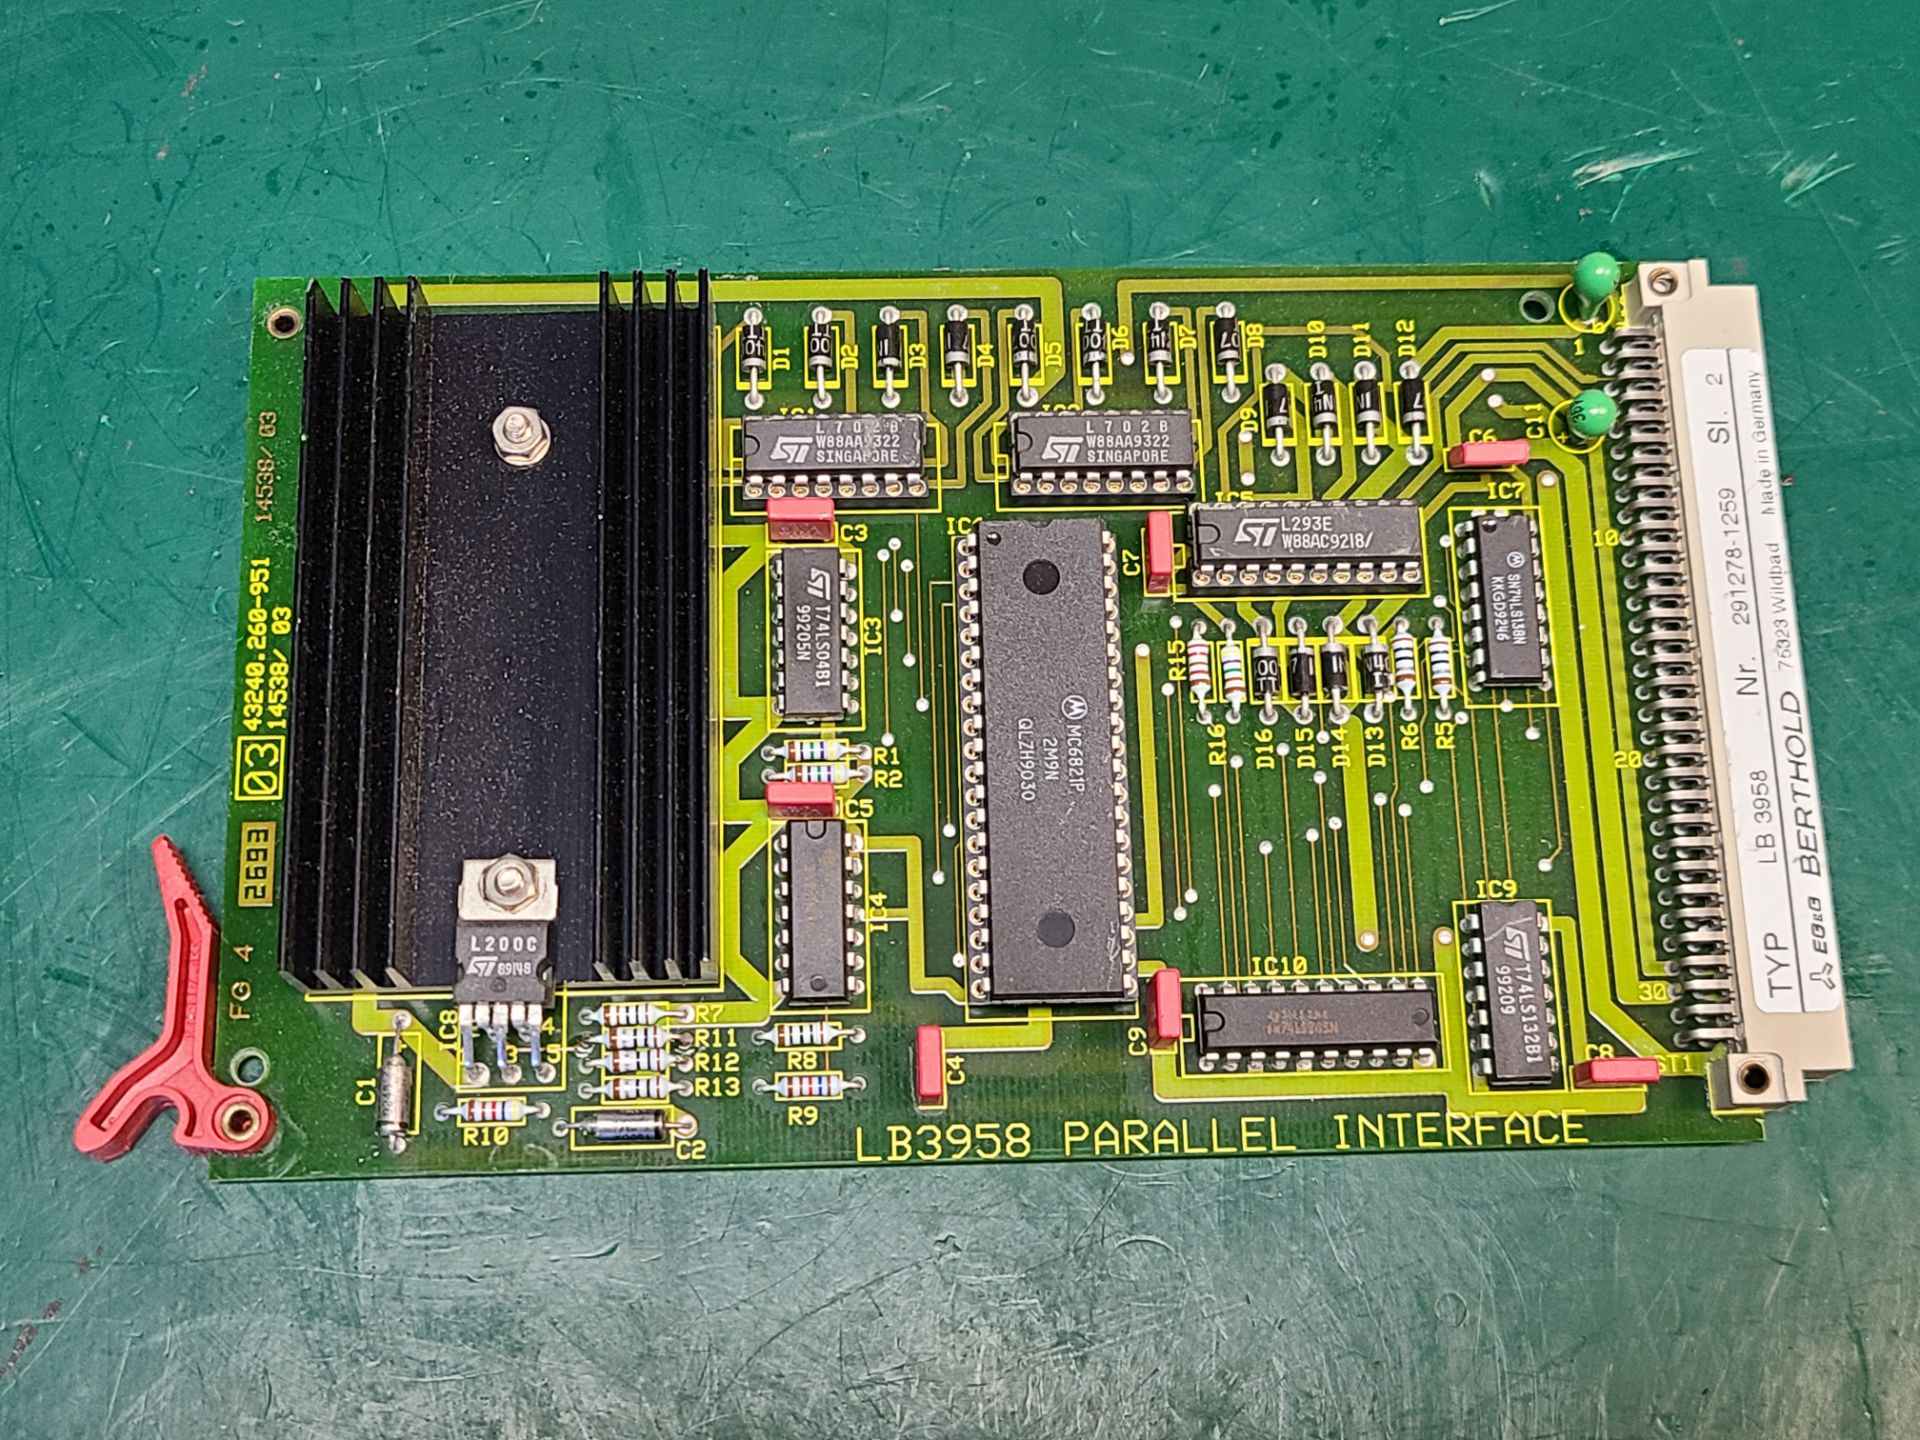 BERTHOLD PARALLEL INTERFACE BOARD